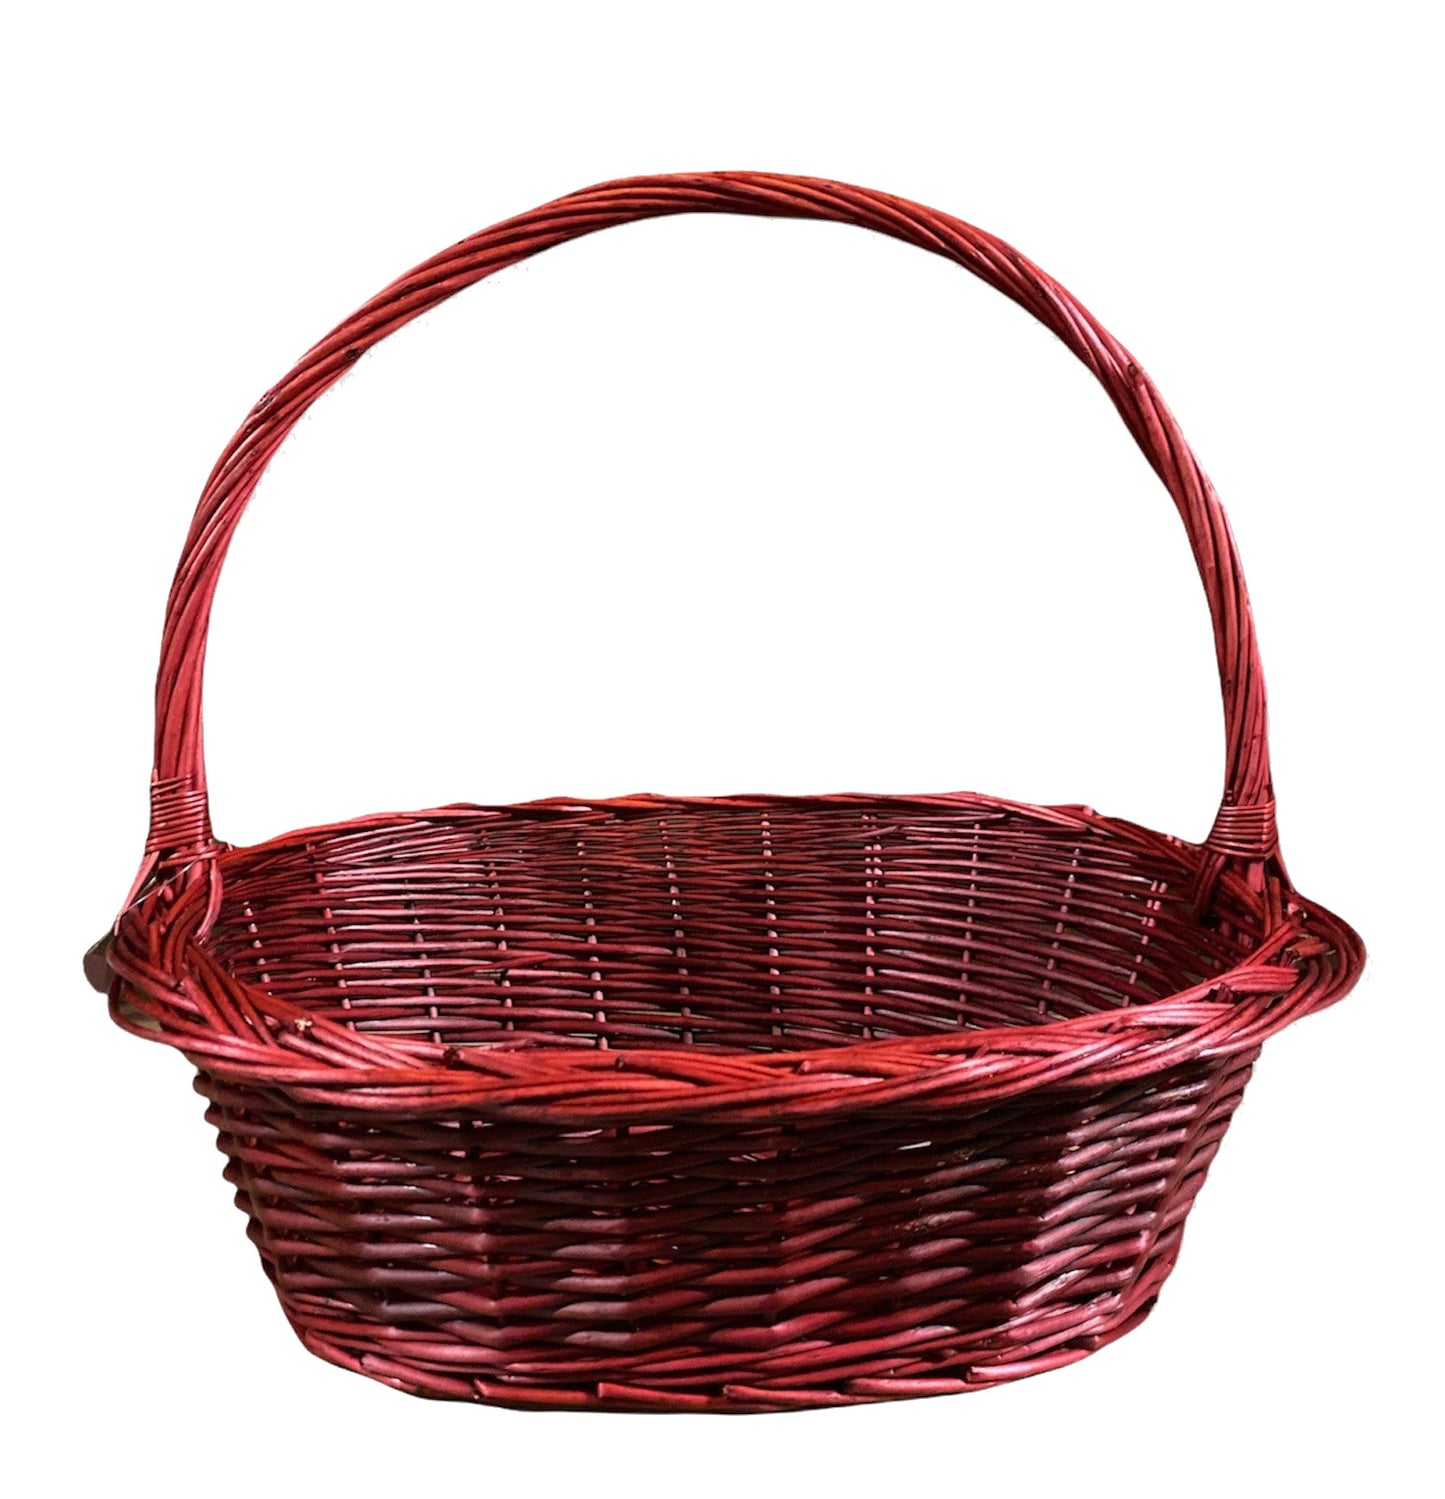 Sloped Oval Willow Baskets - Wine Ruby - Large - 18 x 14 inch 15 High Handle - fits 26 x 40 Bag - New fall 2021